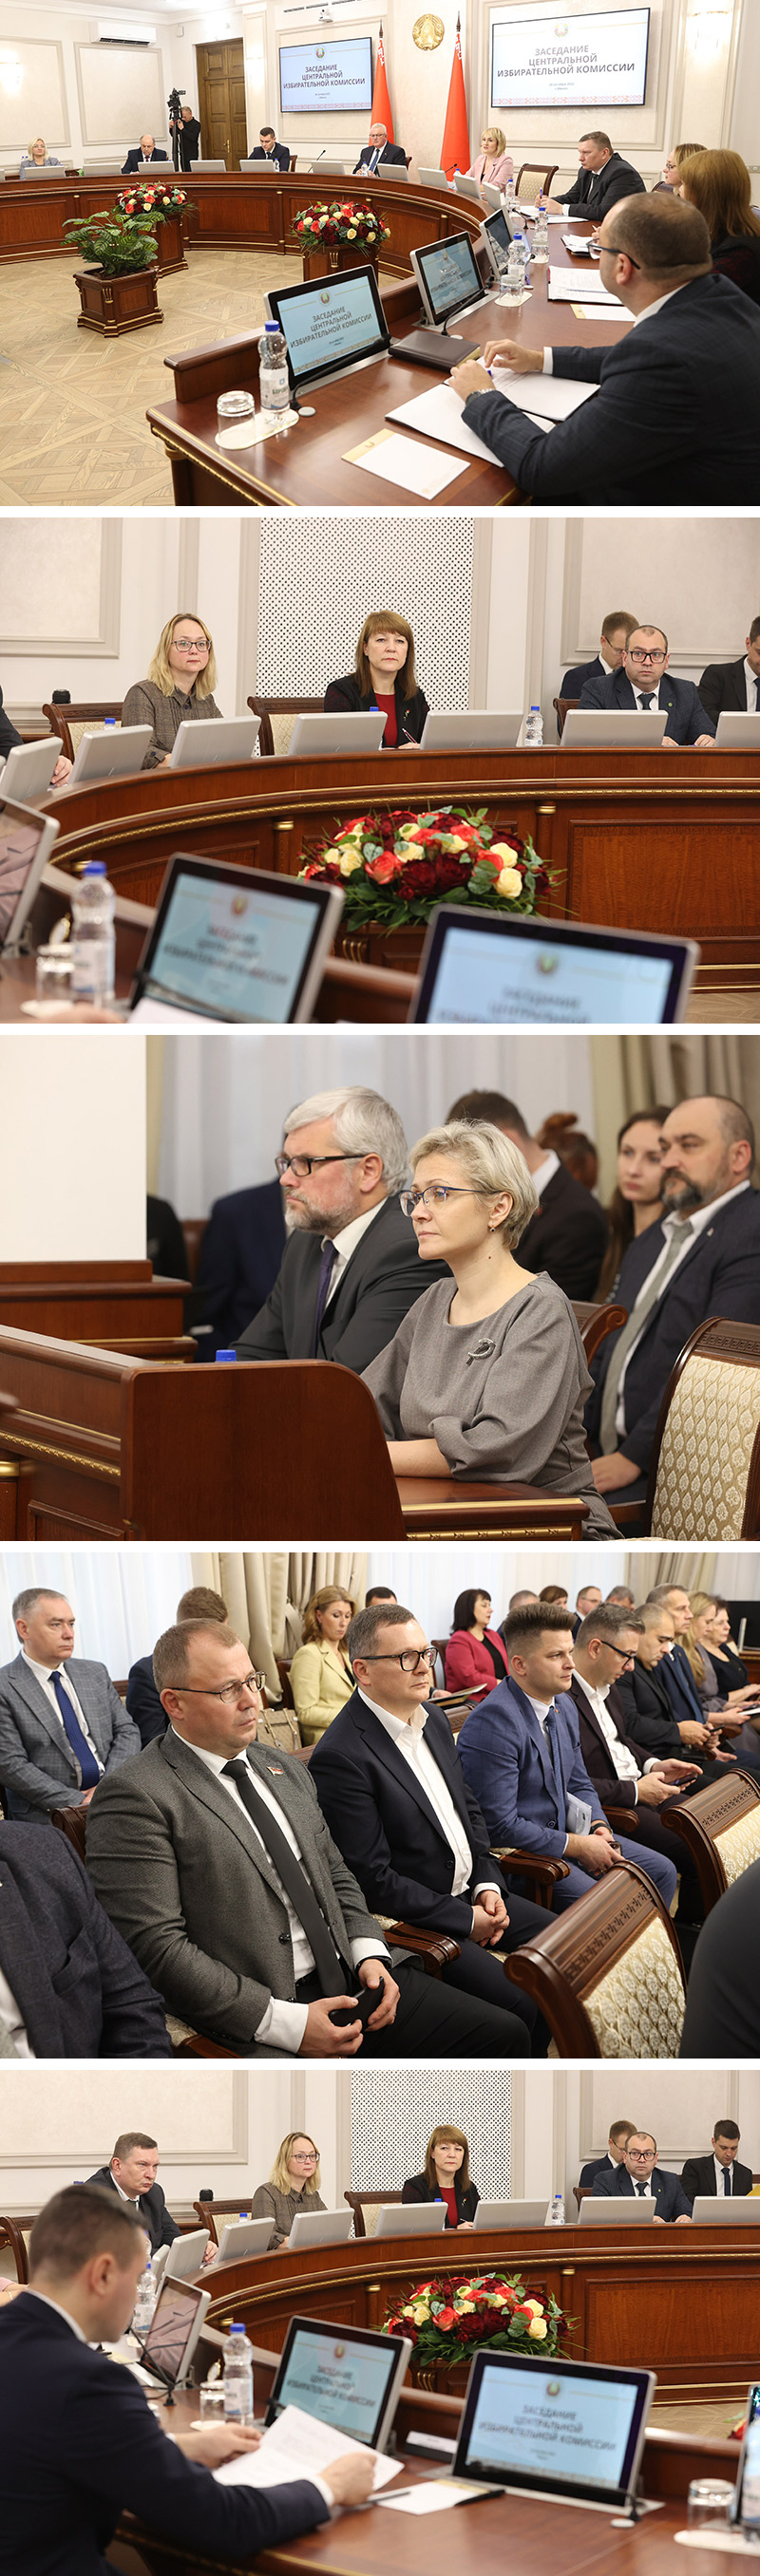 A session of Belarus’ Central Election Commission